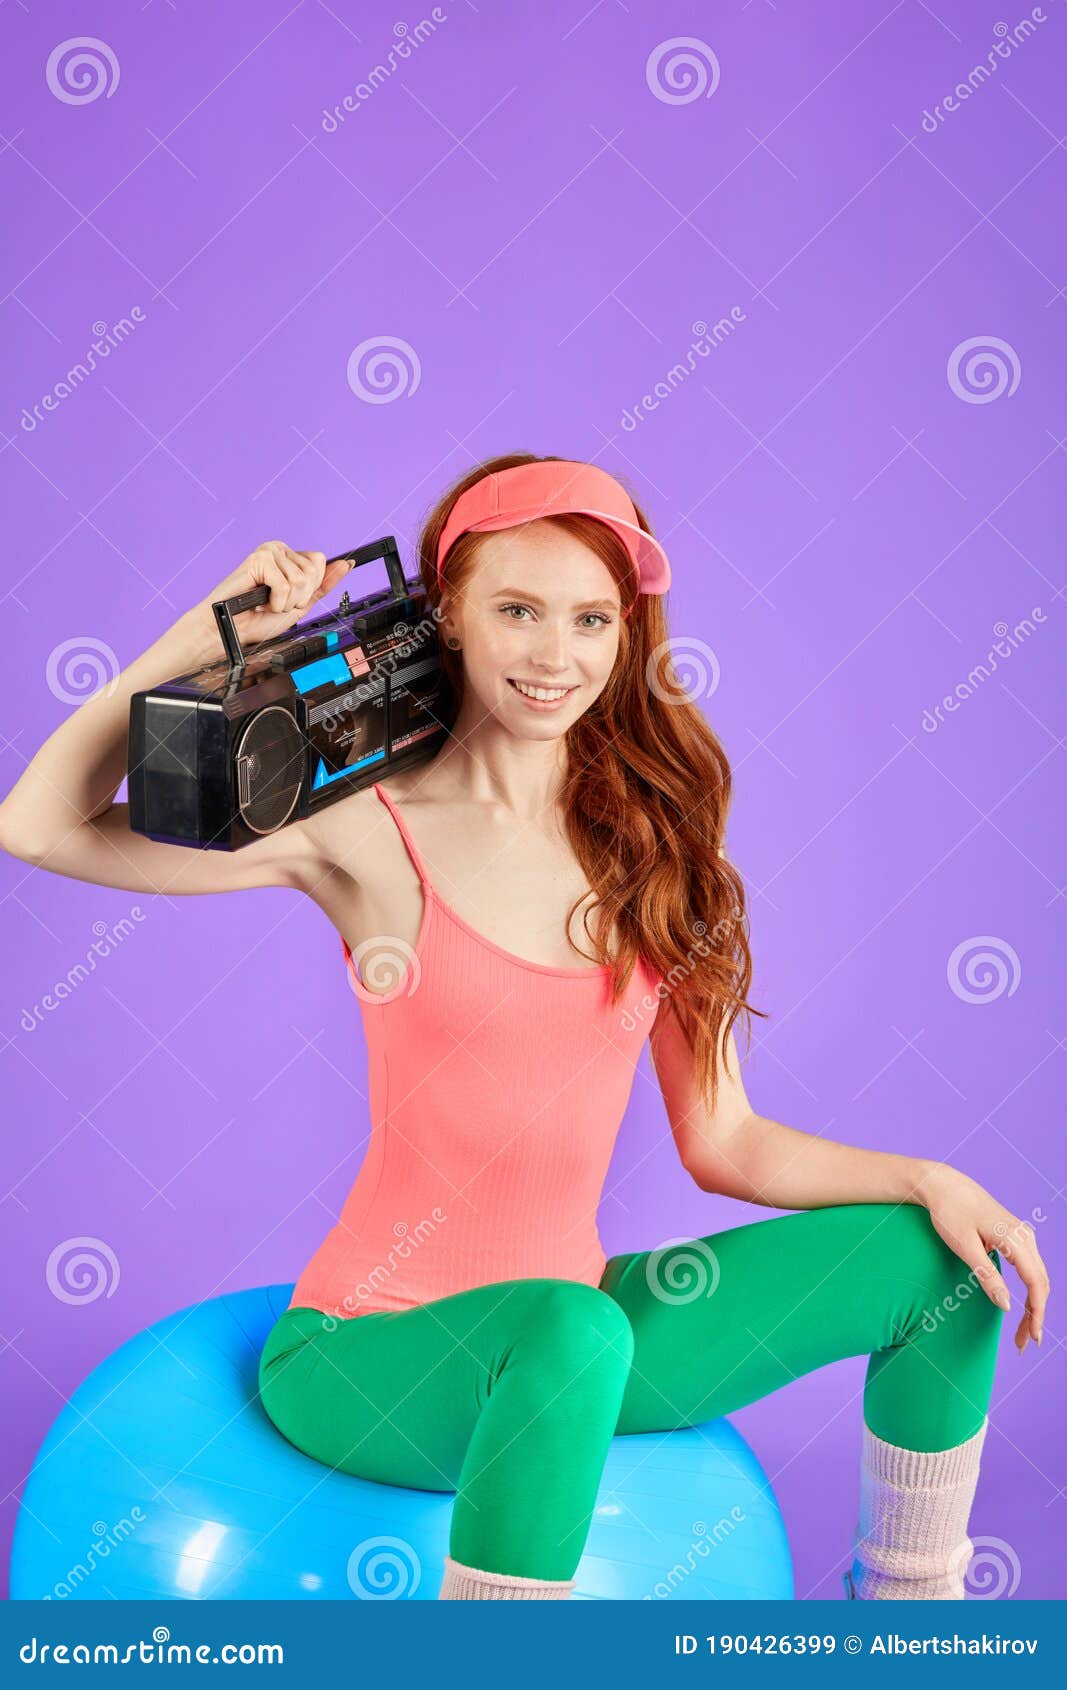 Sporty Girl Posing On Fitness Ball With Portable Cassette Player Stock